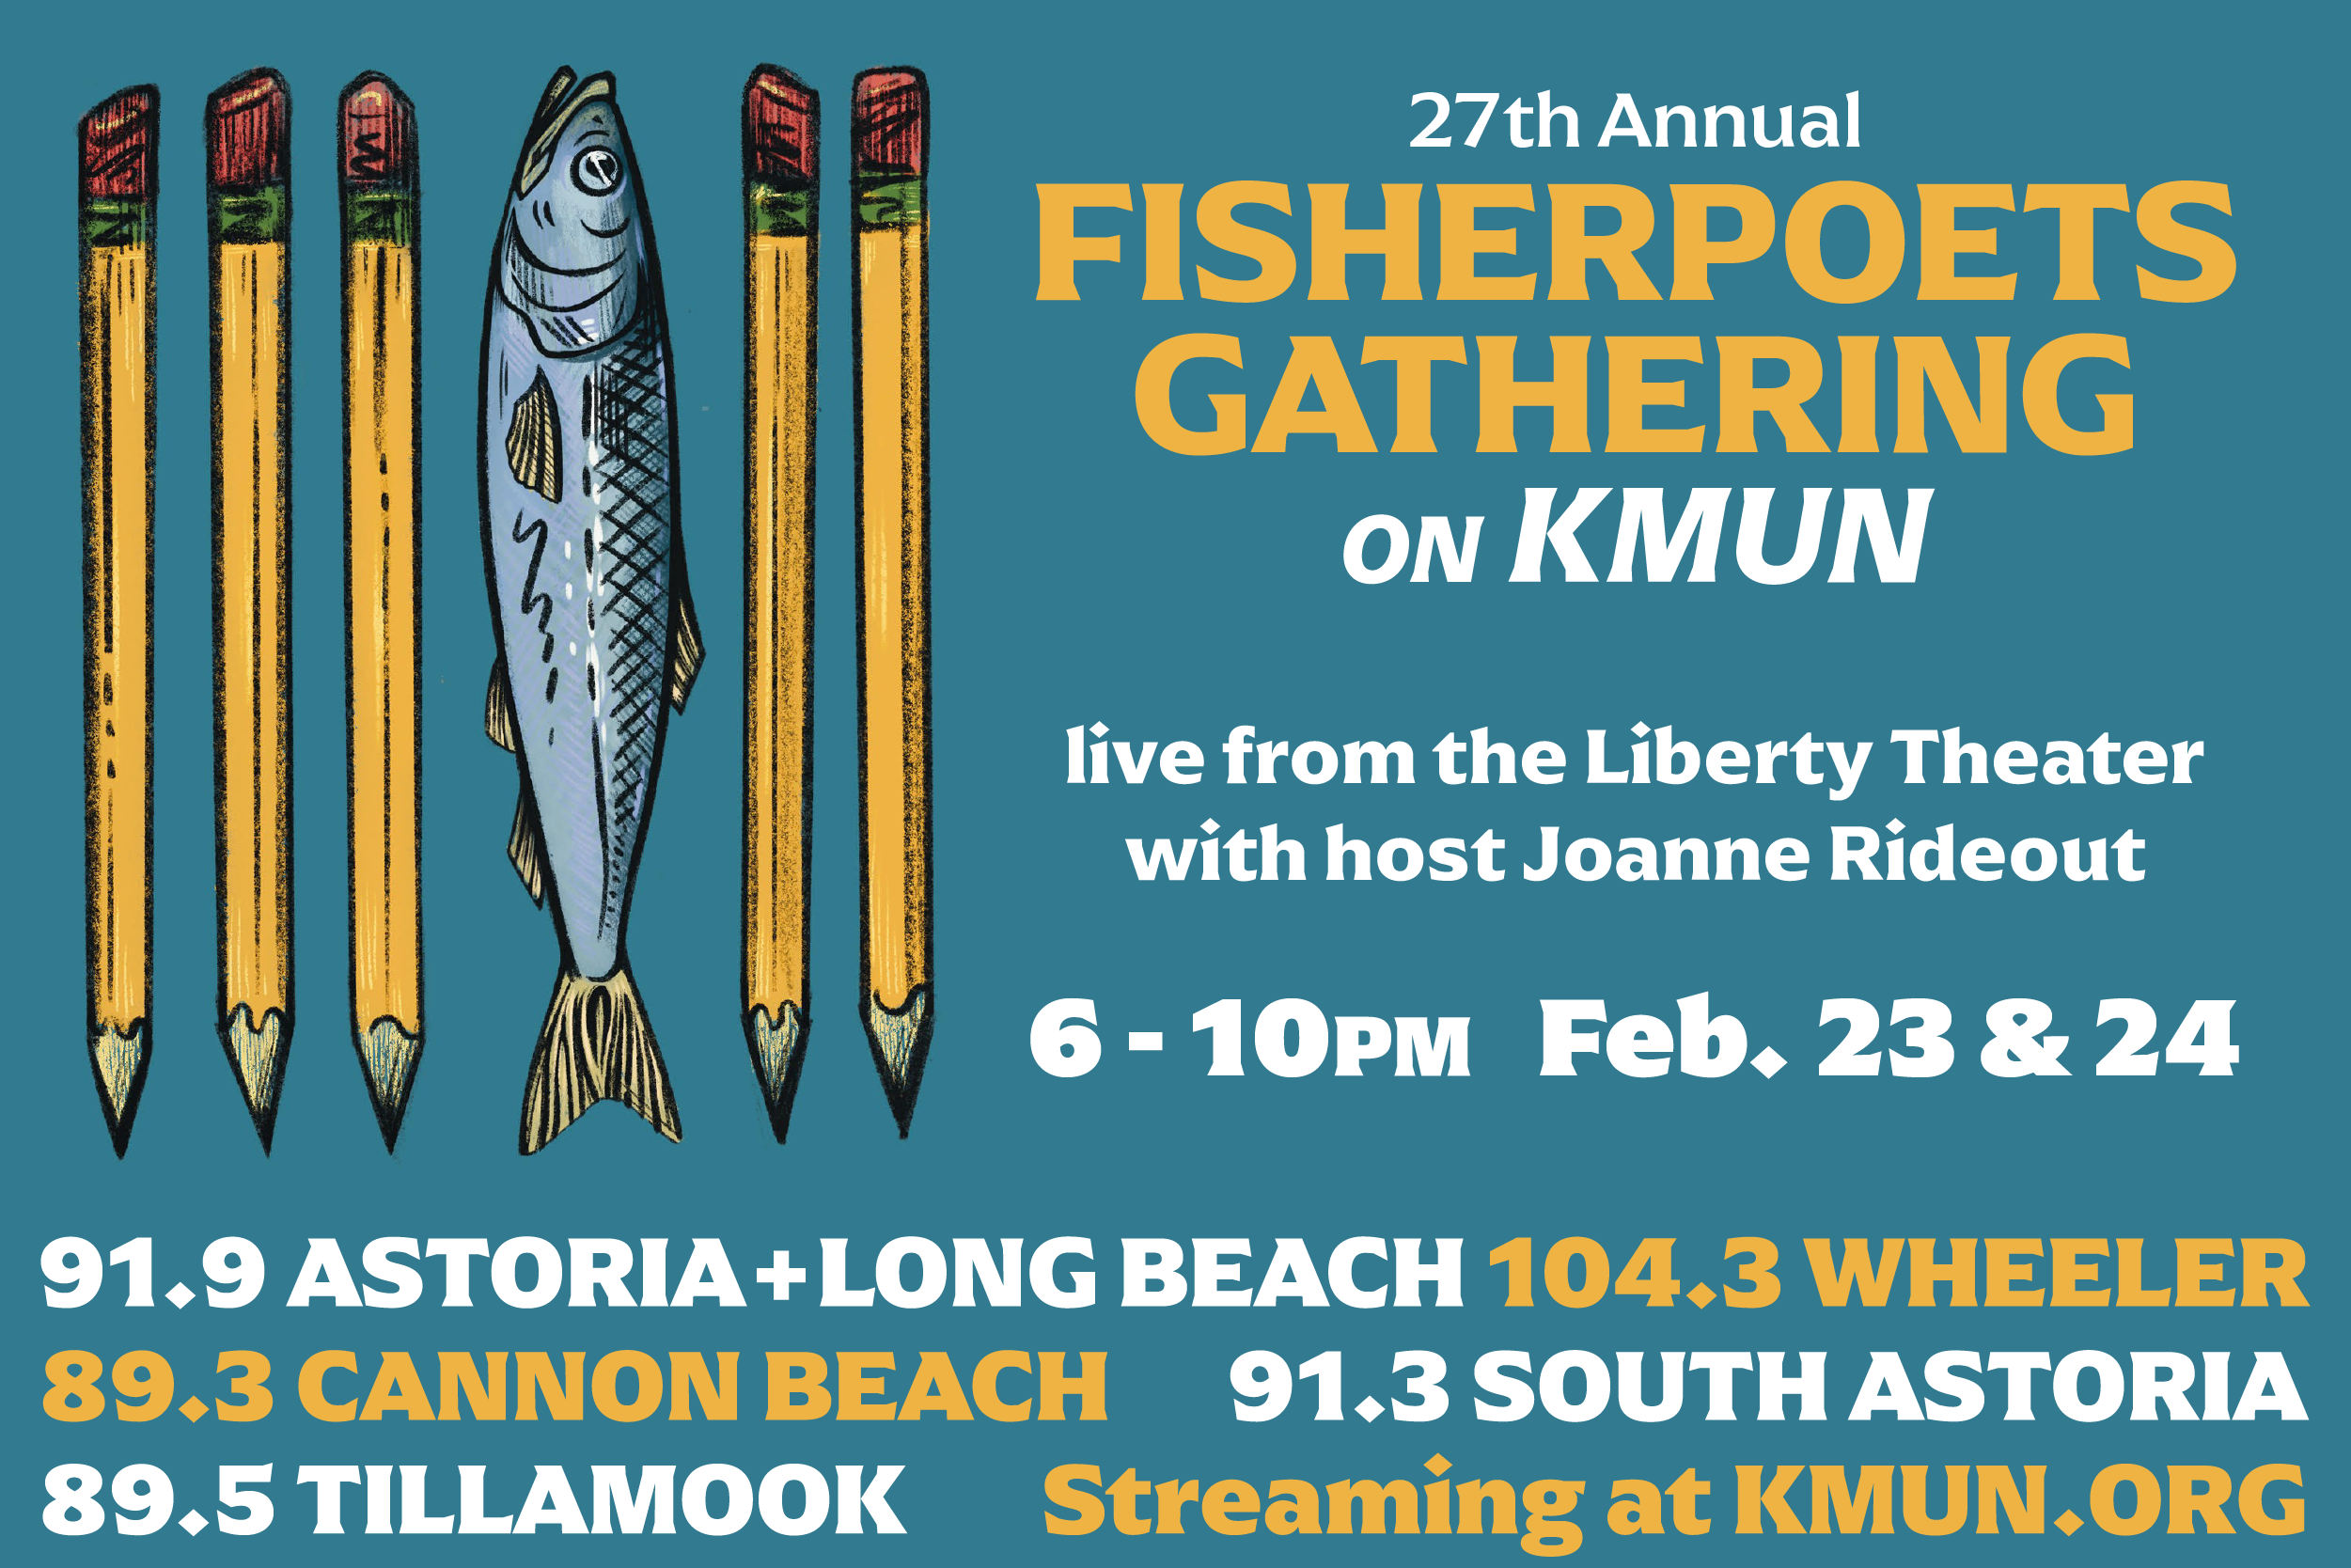 FisherPoets Gathering live on KMUN Friday and Saturday February 23rd and 24th, 6 to 8 PM